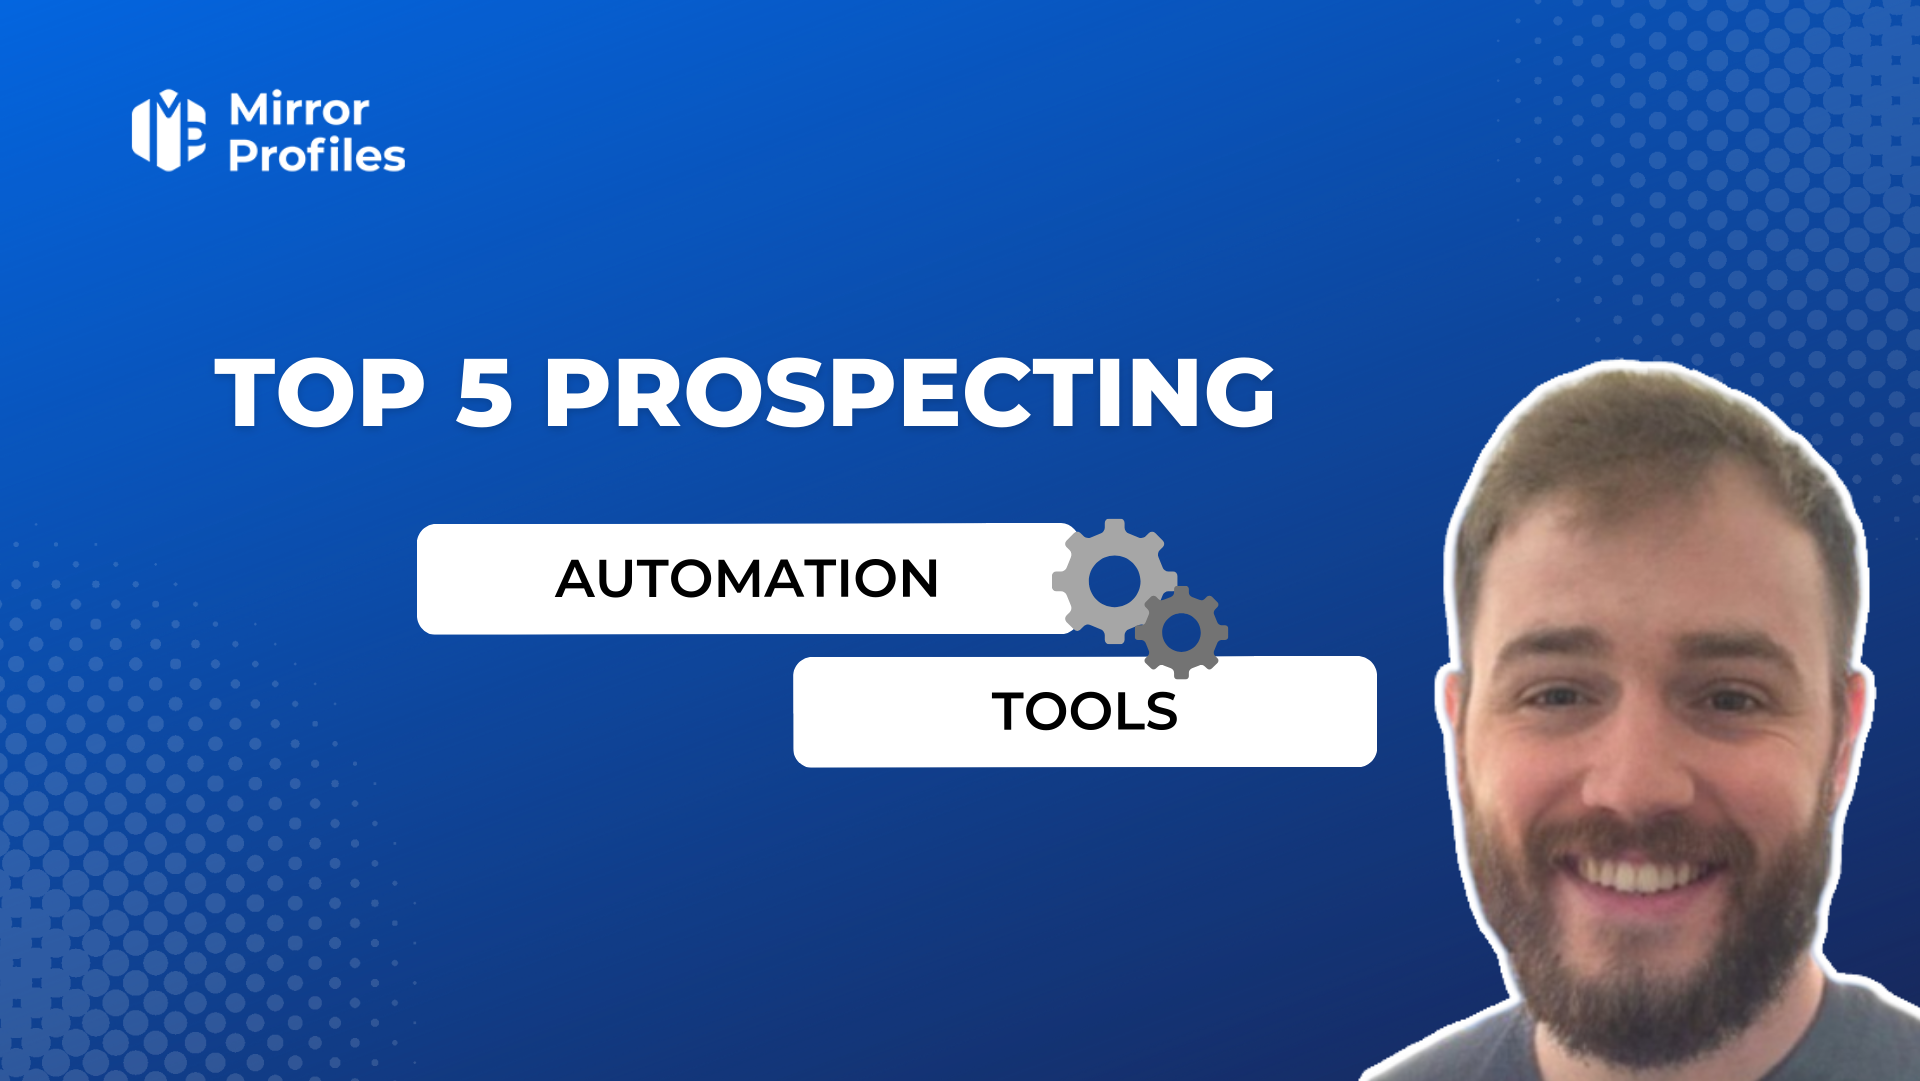 Top 5 prospecting automation tools